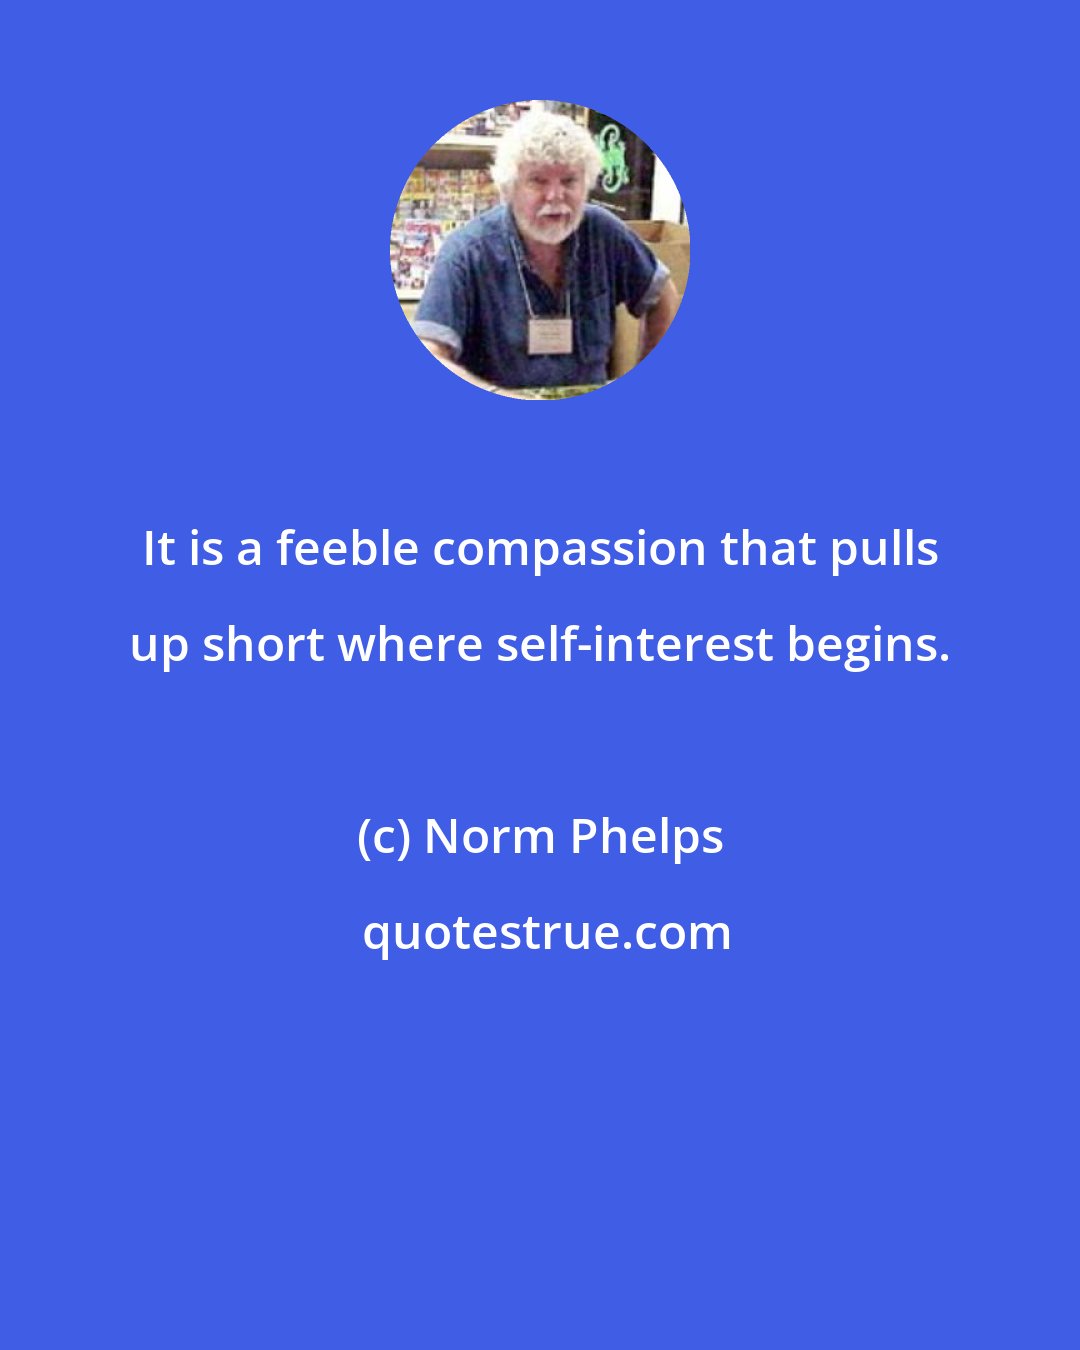 Norm Phelps: It is a feeble compassion that pulls up short where self-interest begins.